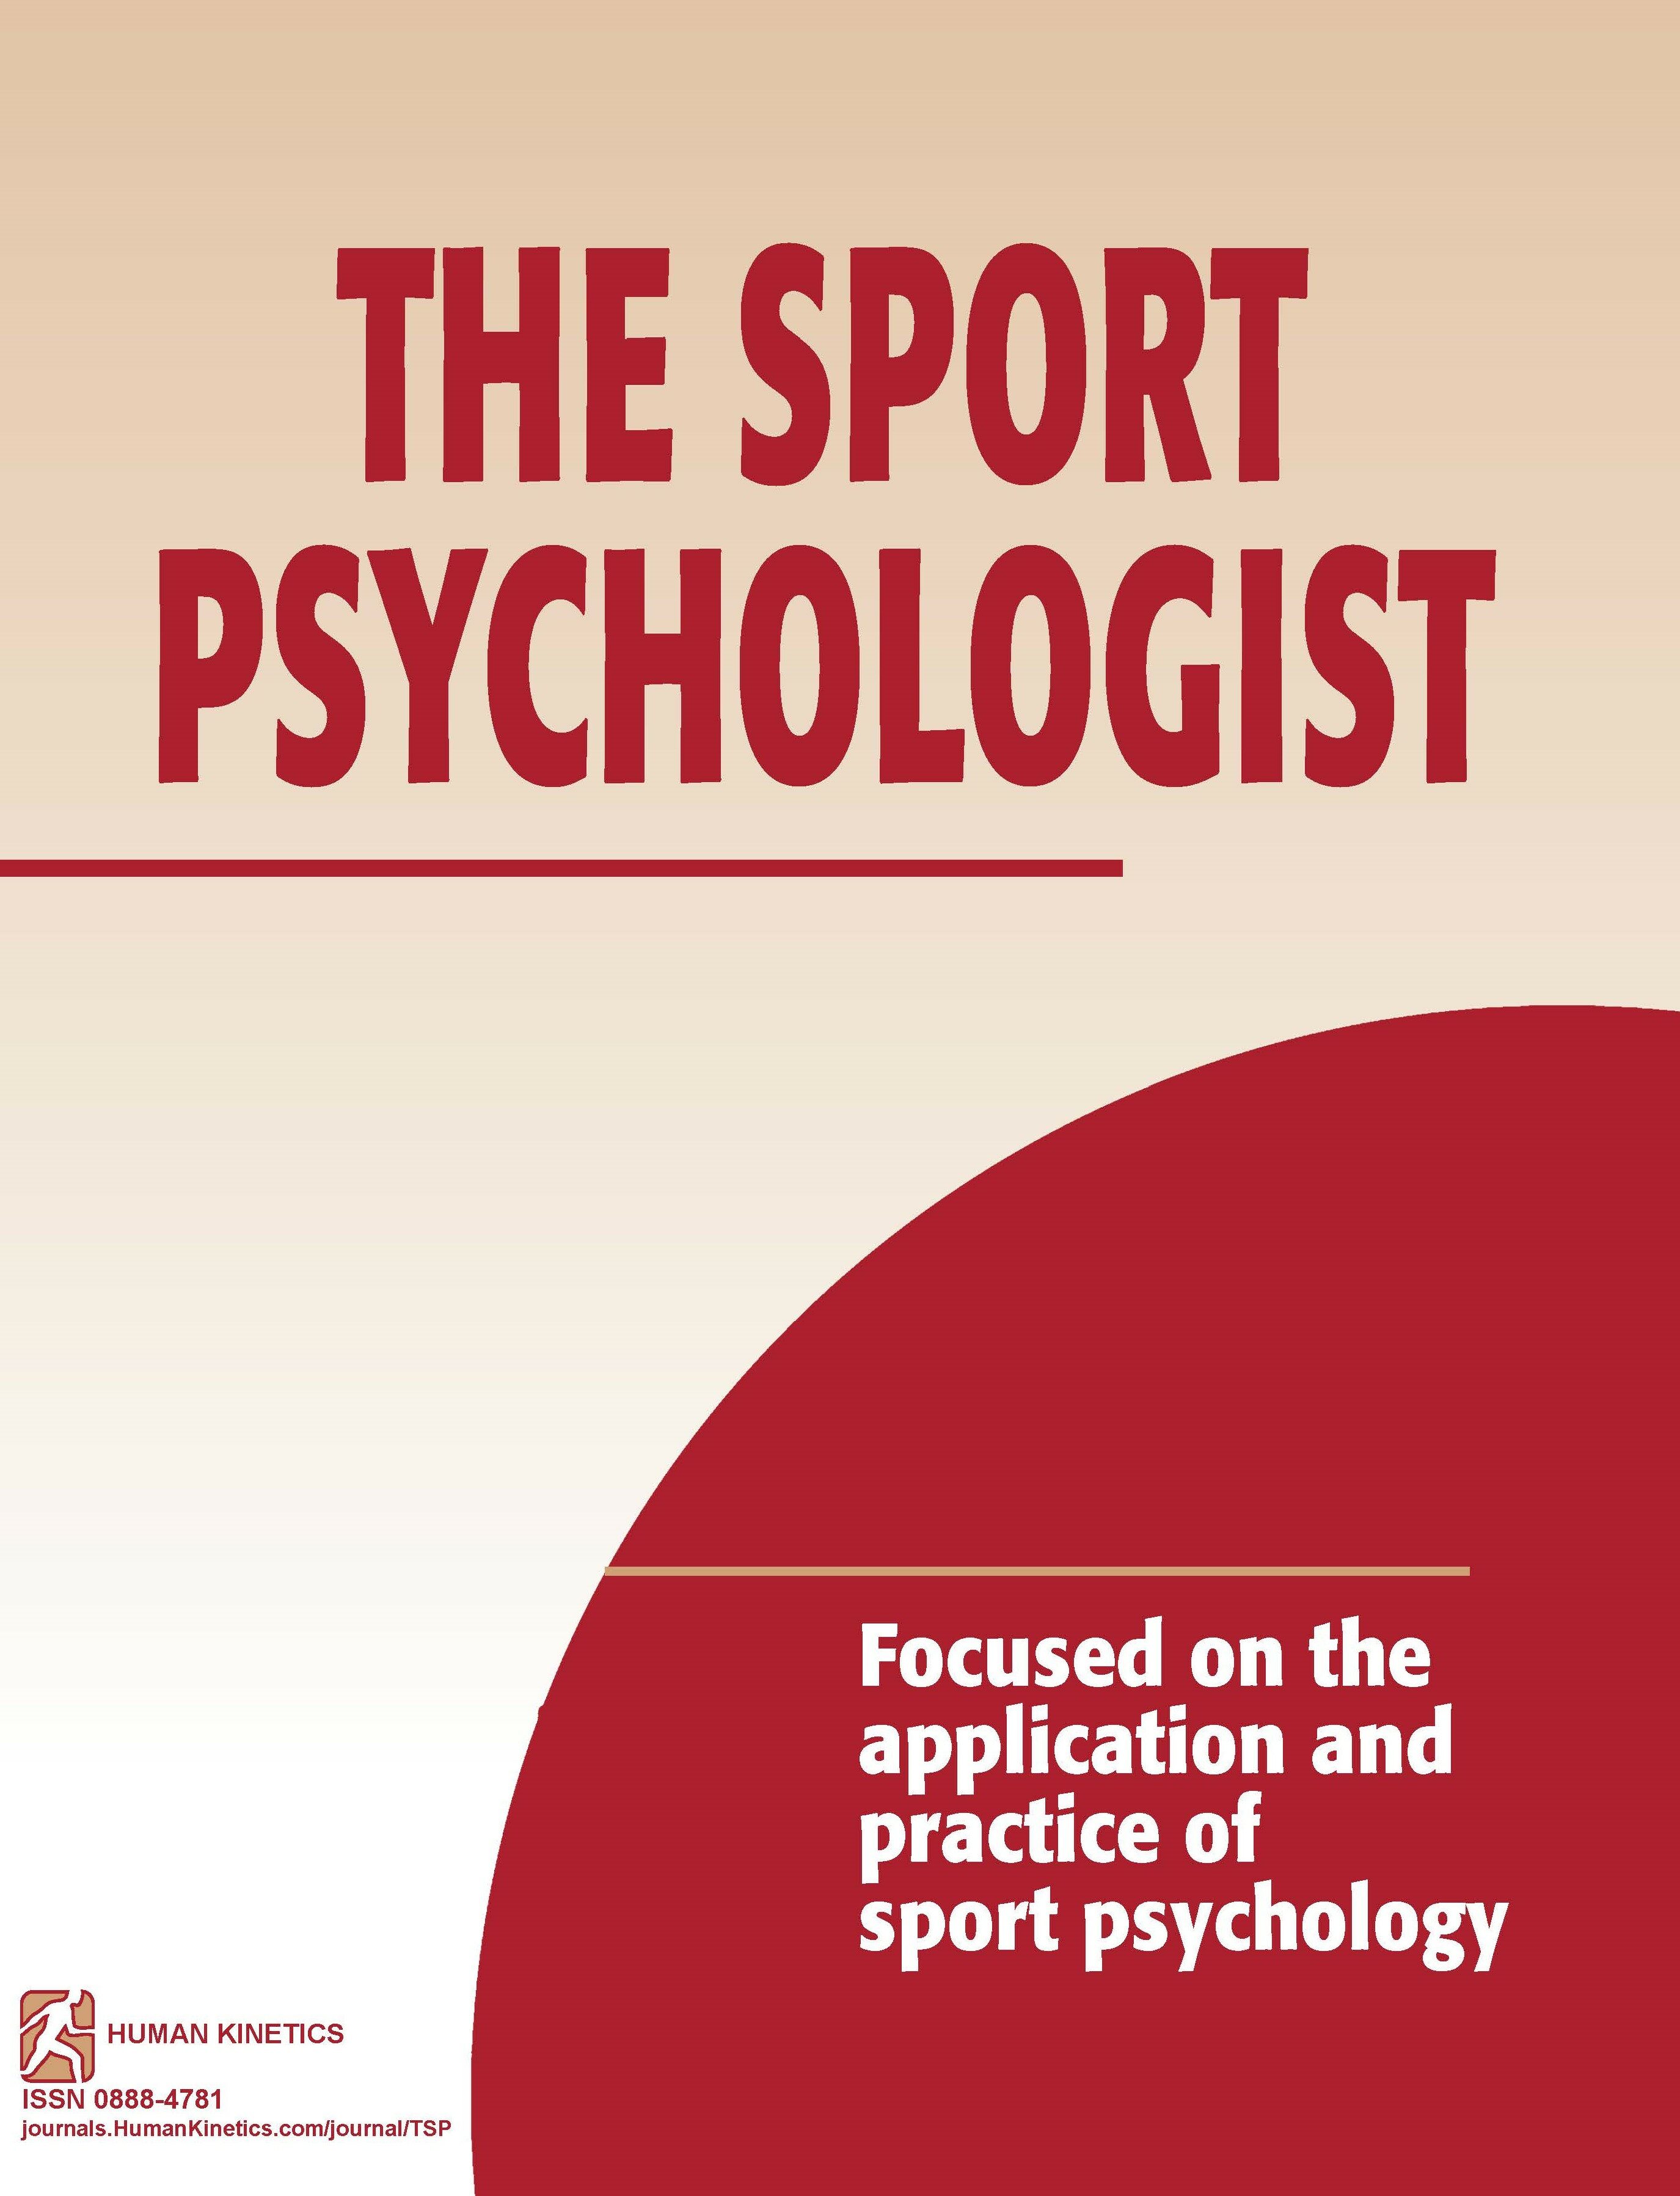 National Collegiate Athletic Association Division I Assistant Coaches’ Understanding and Use of Mental Performance and Mental Health Services